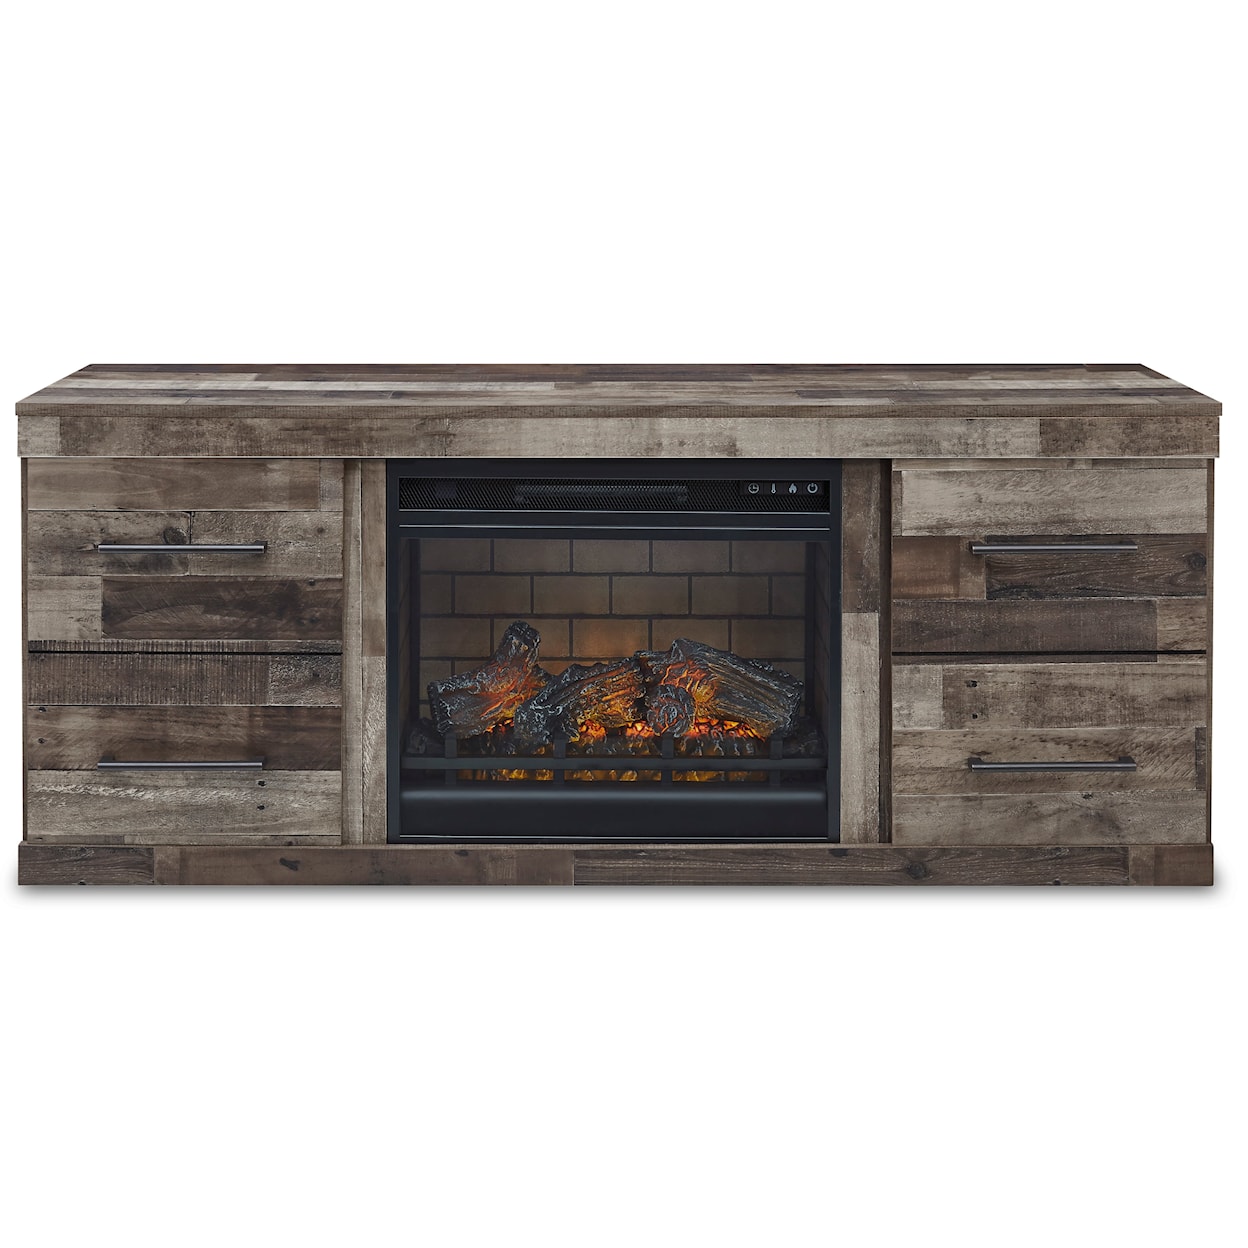 Benchcraft Derekson 60" TV Stand with Electric Fireplace